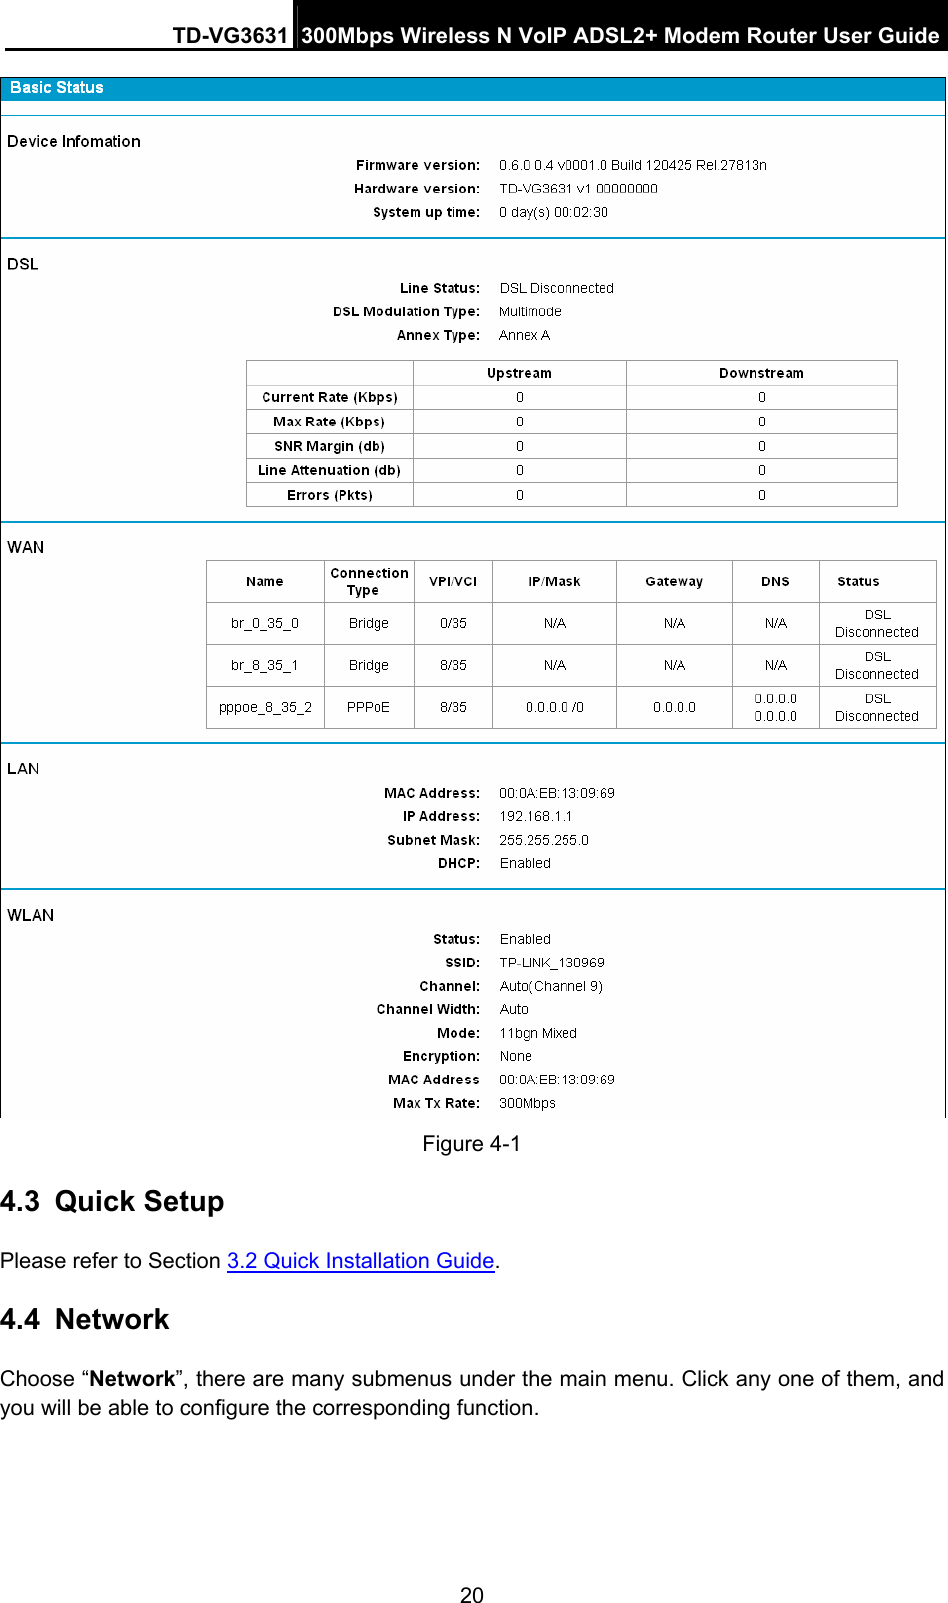 TD-VG3631 300Mbps Wireless N VoIP ADSL2+ Modem Router User Guide 20  Figure 4-1 4.3  Quick Setup Please refer to Section 3.2 Quick Installation Guide. 4.4  Network Choose “Network”, there are many submenus under the main menu. Click any one of them, and you will be able to configure the corresponding function. 